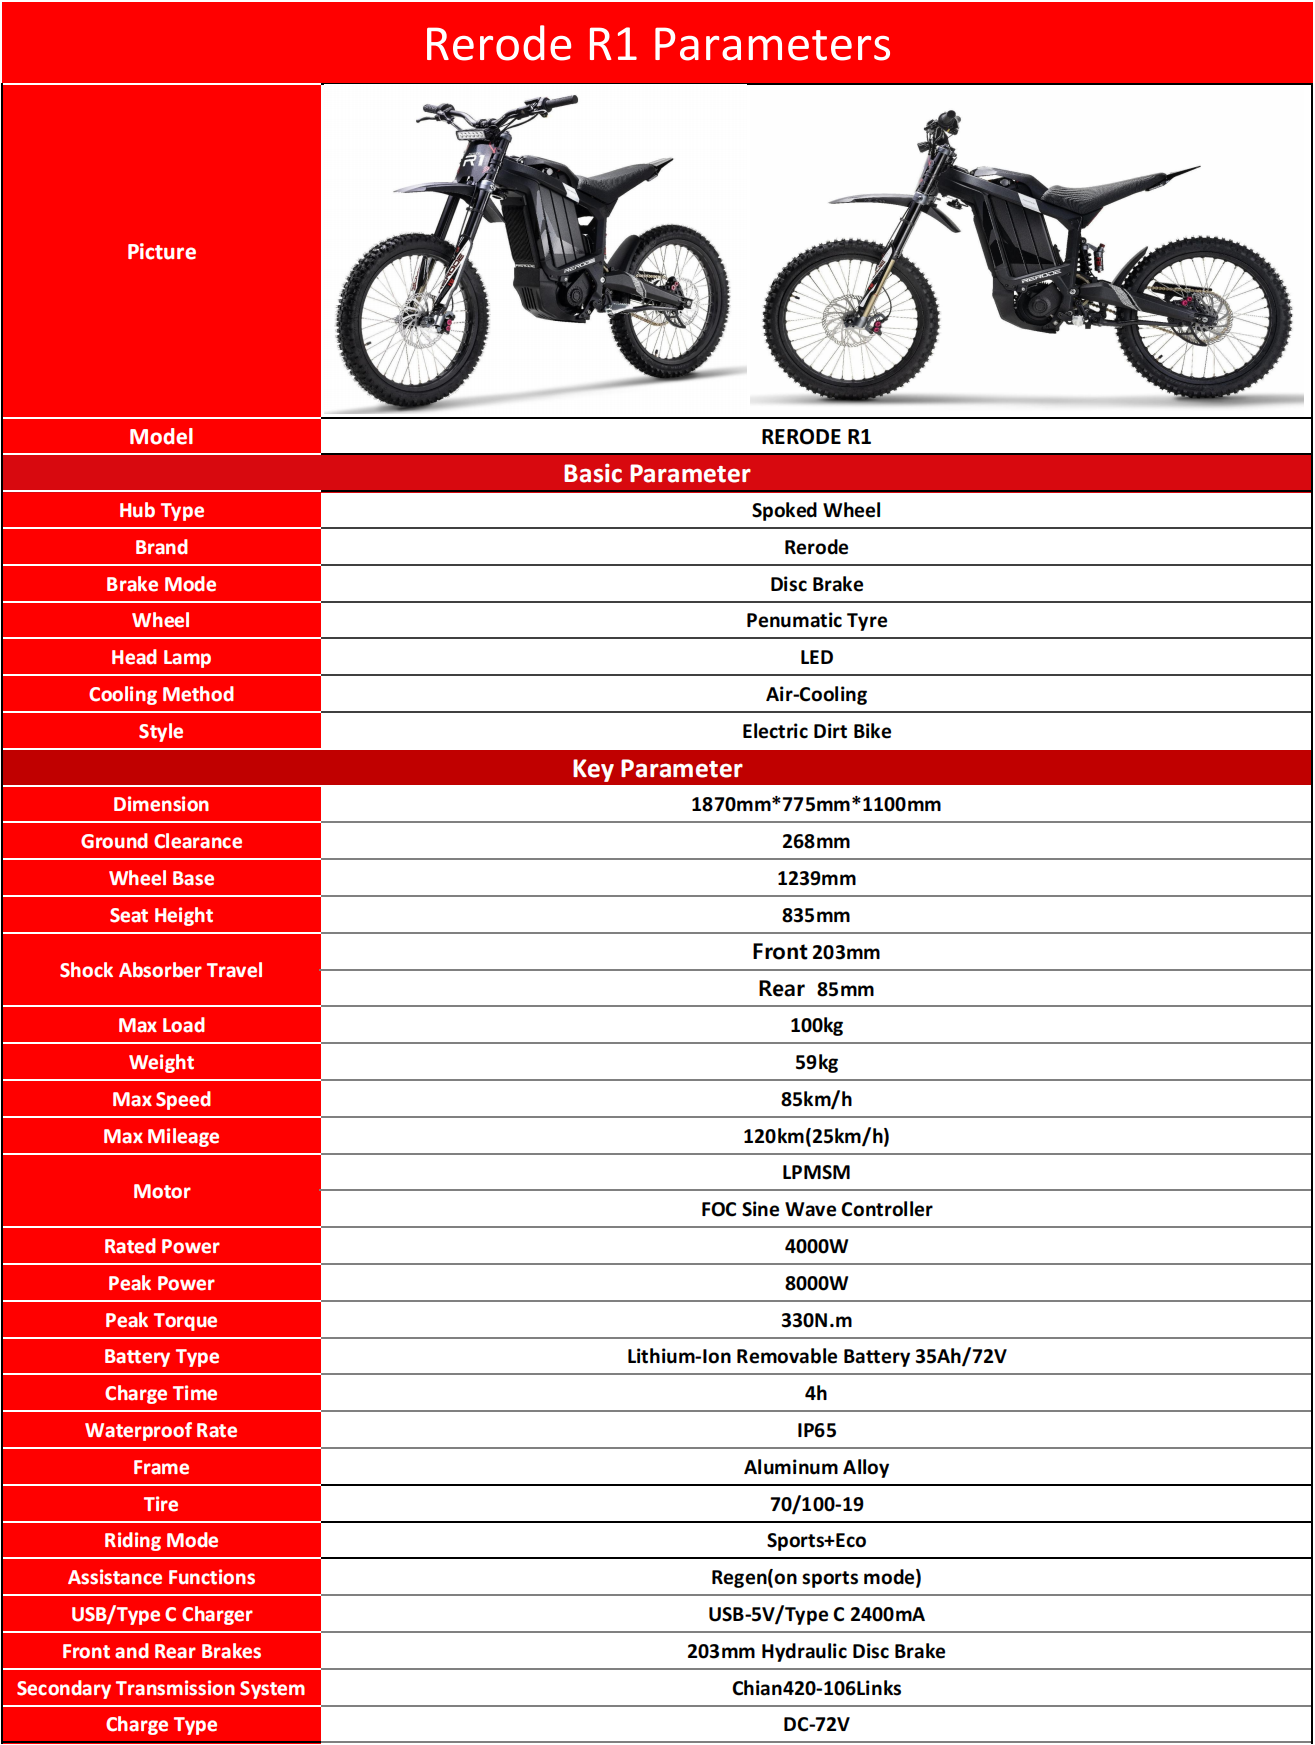 Rerode Specification